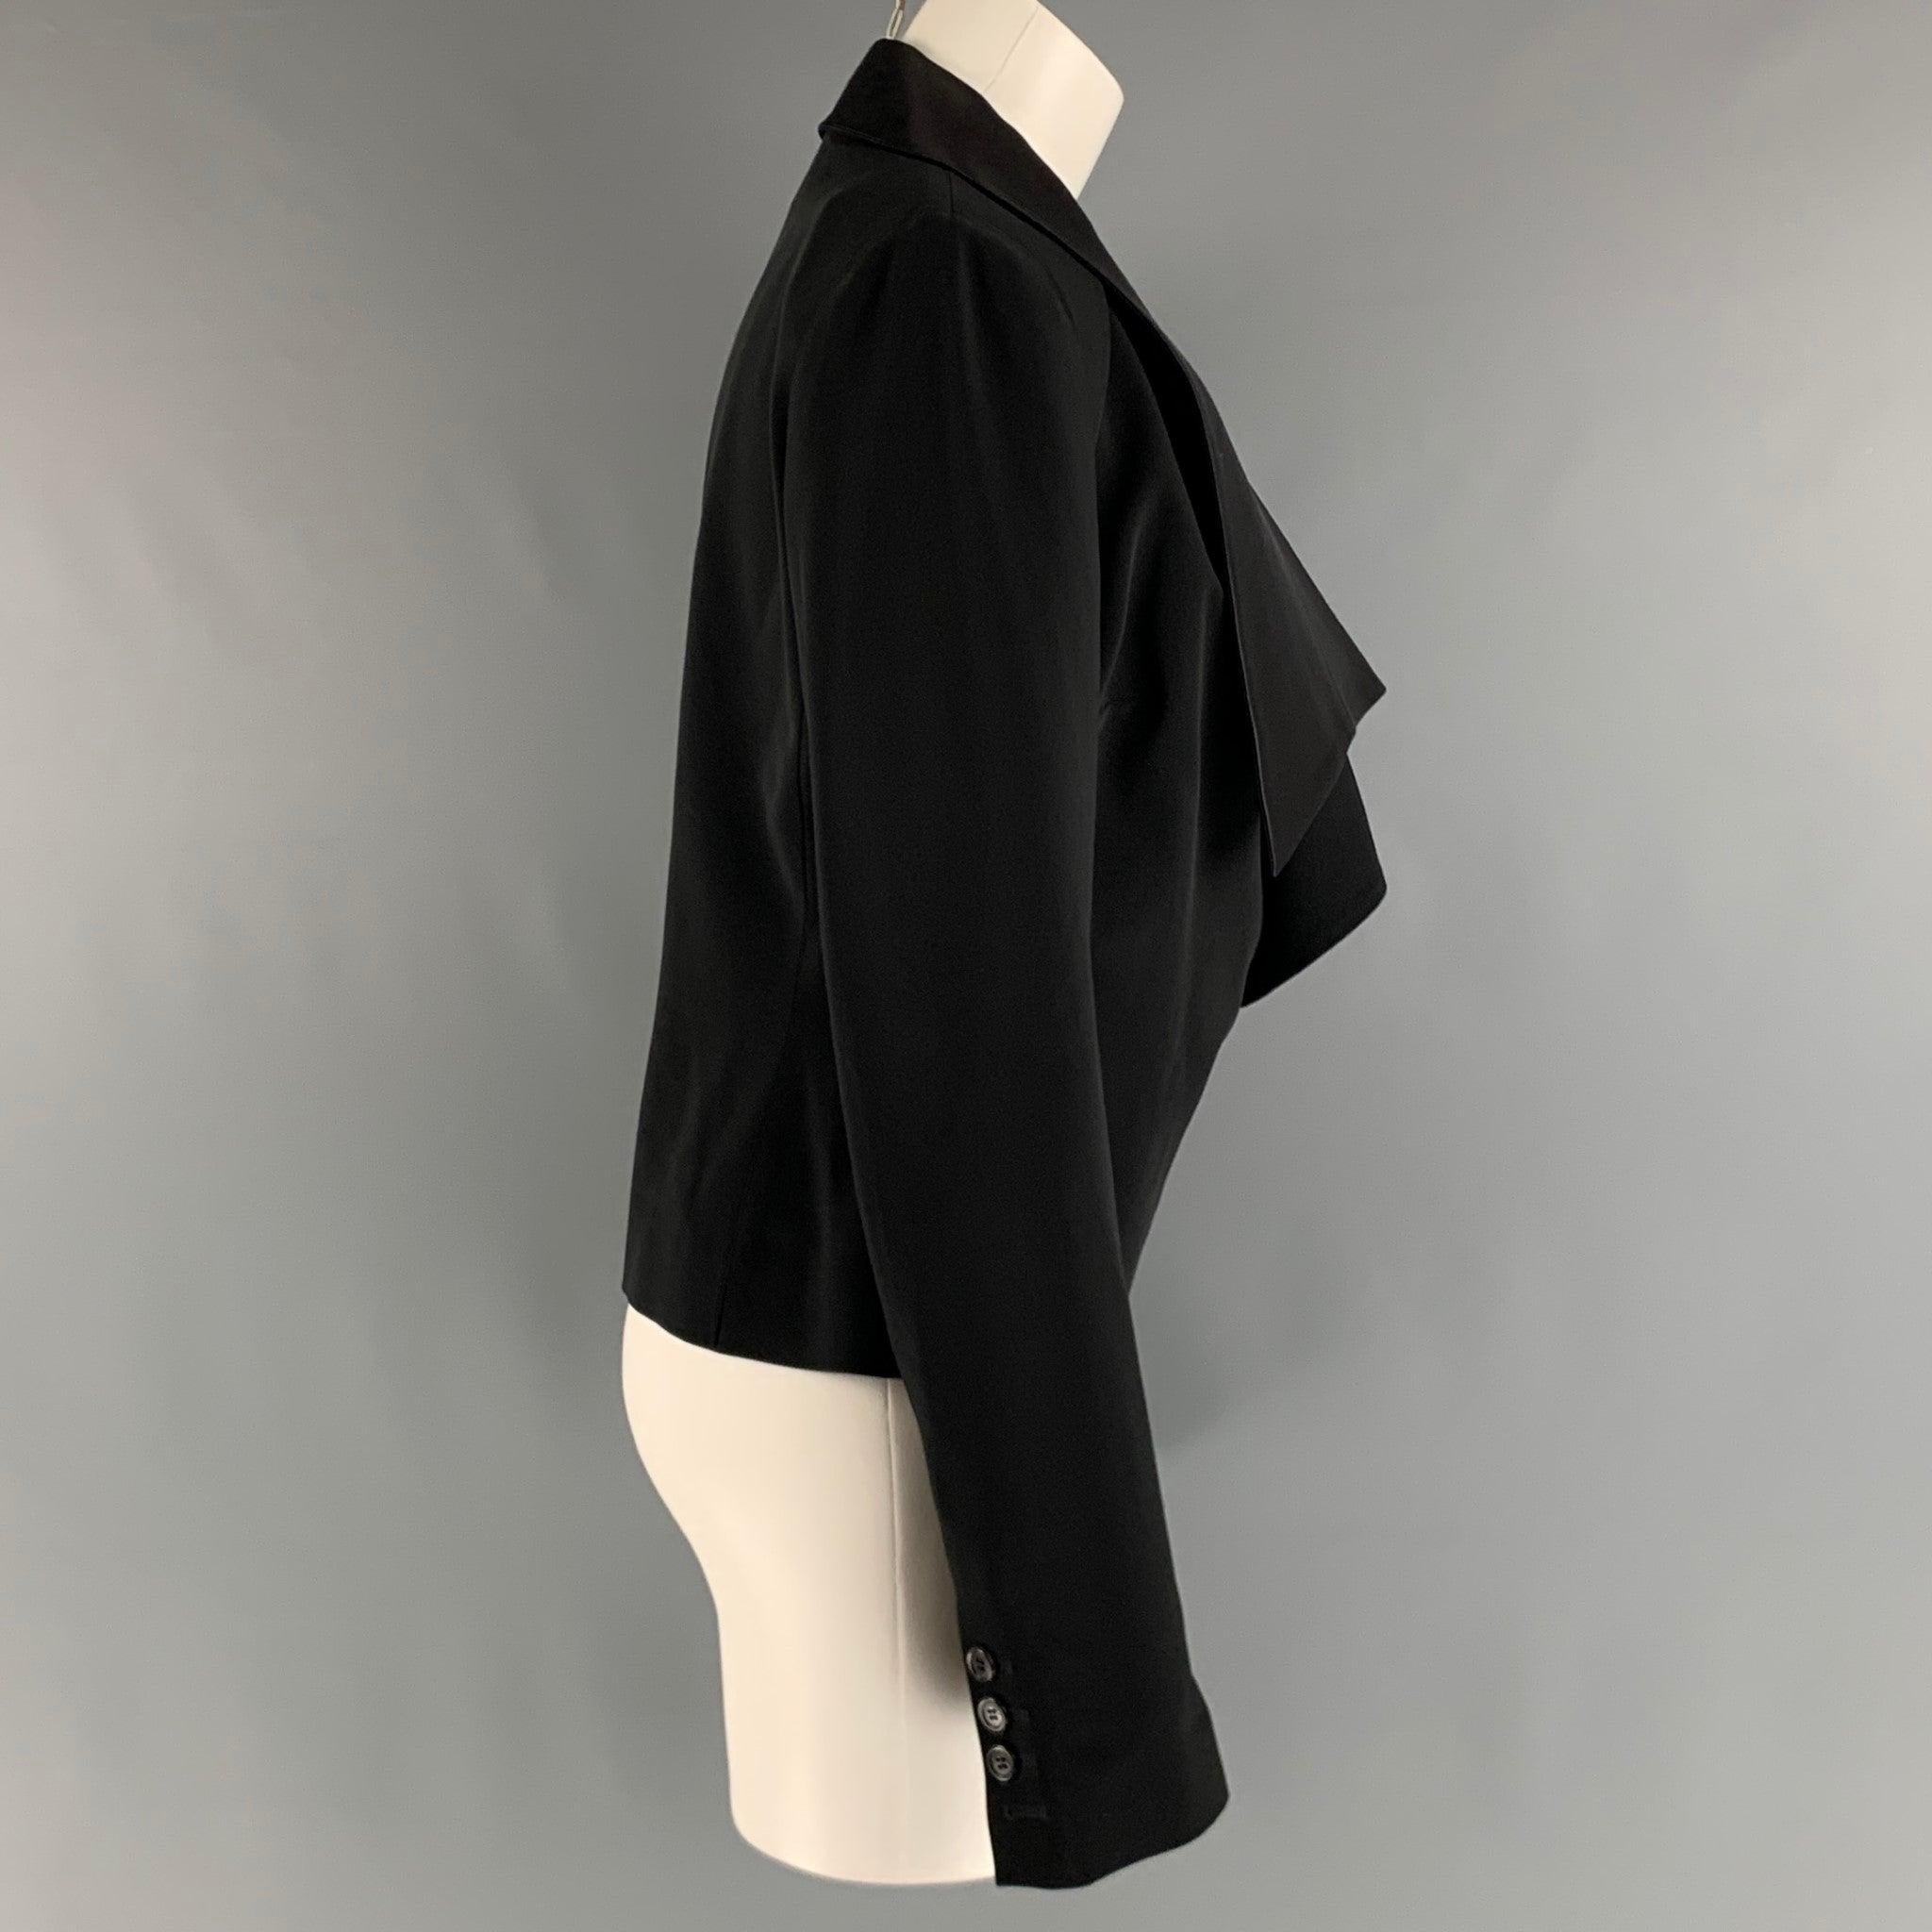 VIKTOR & ROLF tuxedo jacket comes in a black polyester and spandex woven material featuring a long asymmetrical collar, and a double breasted style. Made in Italy.Excellent Pre-Owned Condition. 

Marked:   44 

Measurements: 
 
Shoulder: 16 inches